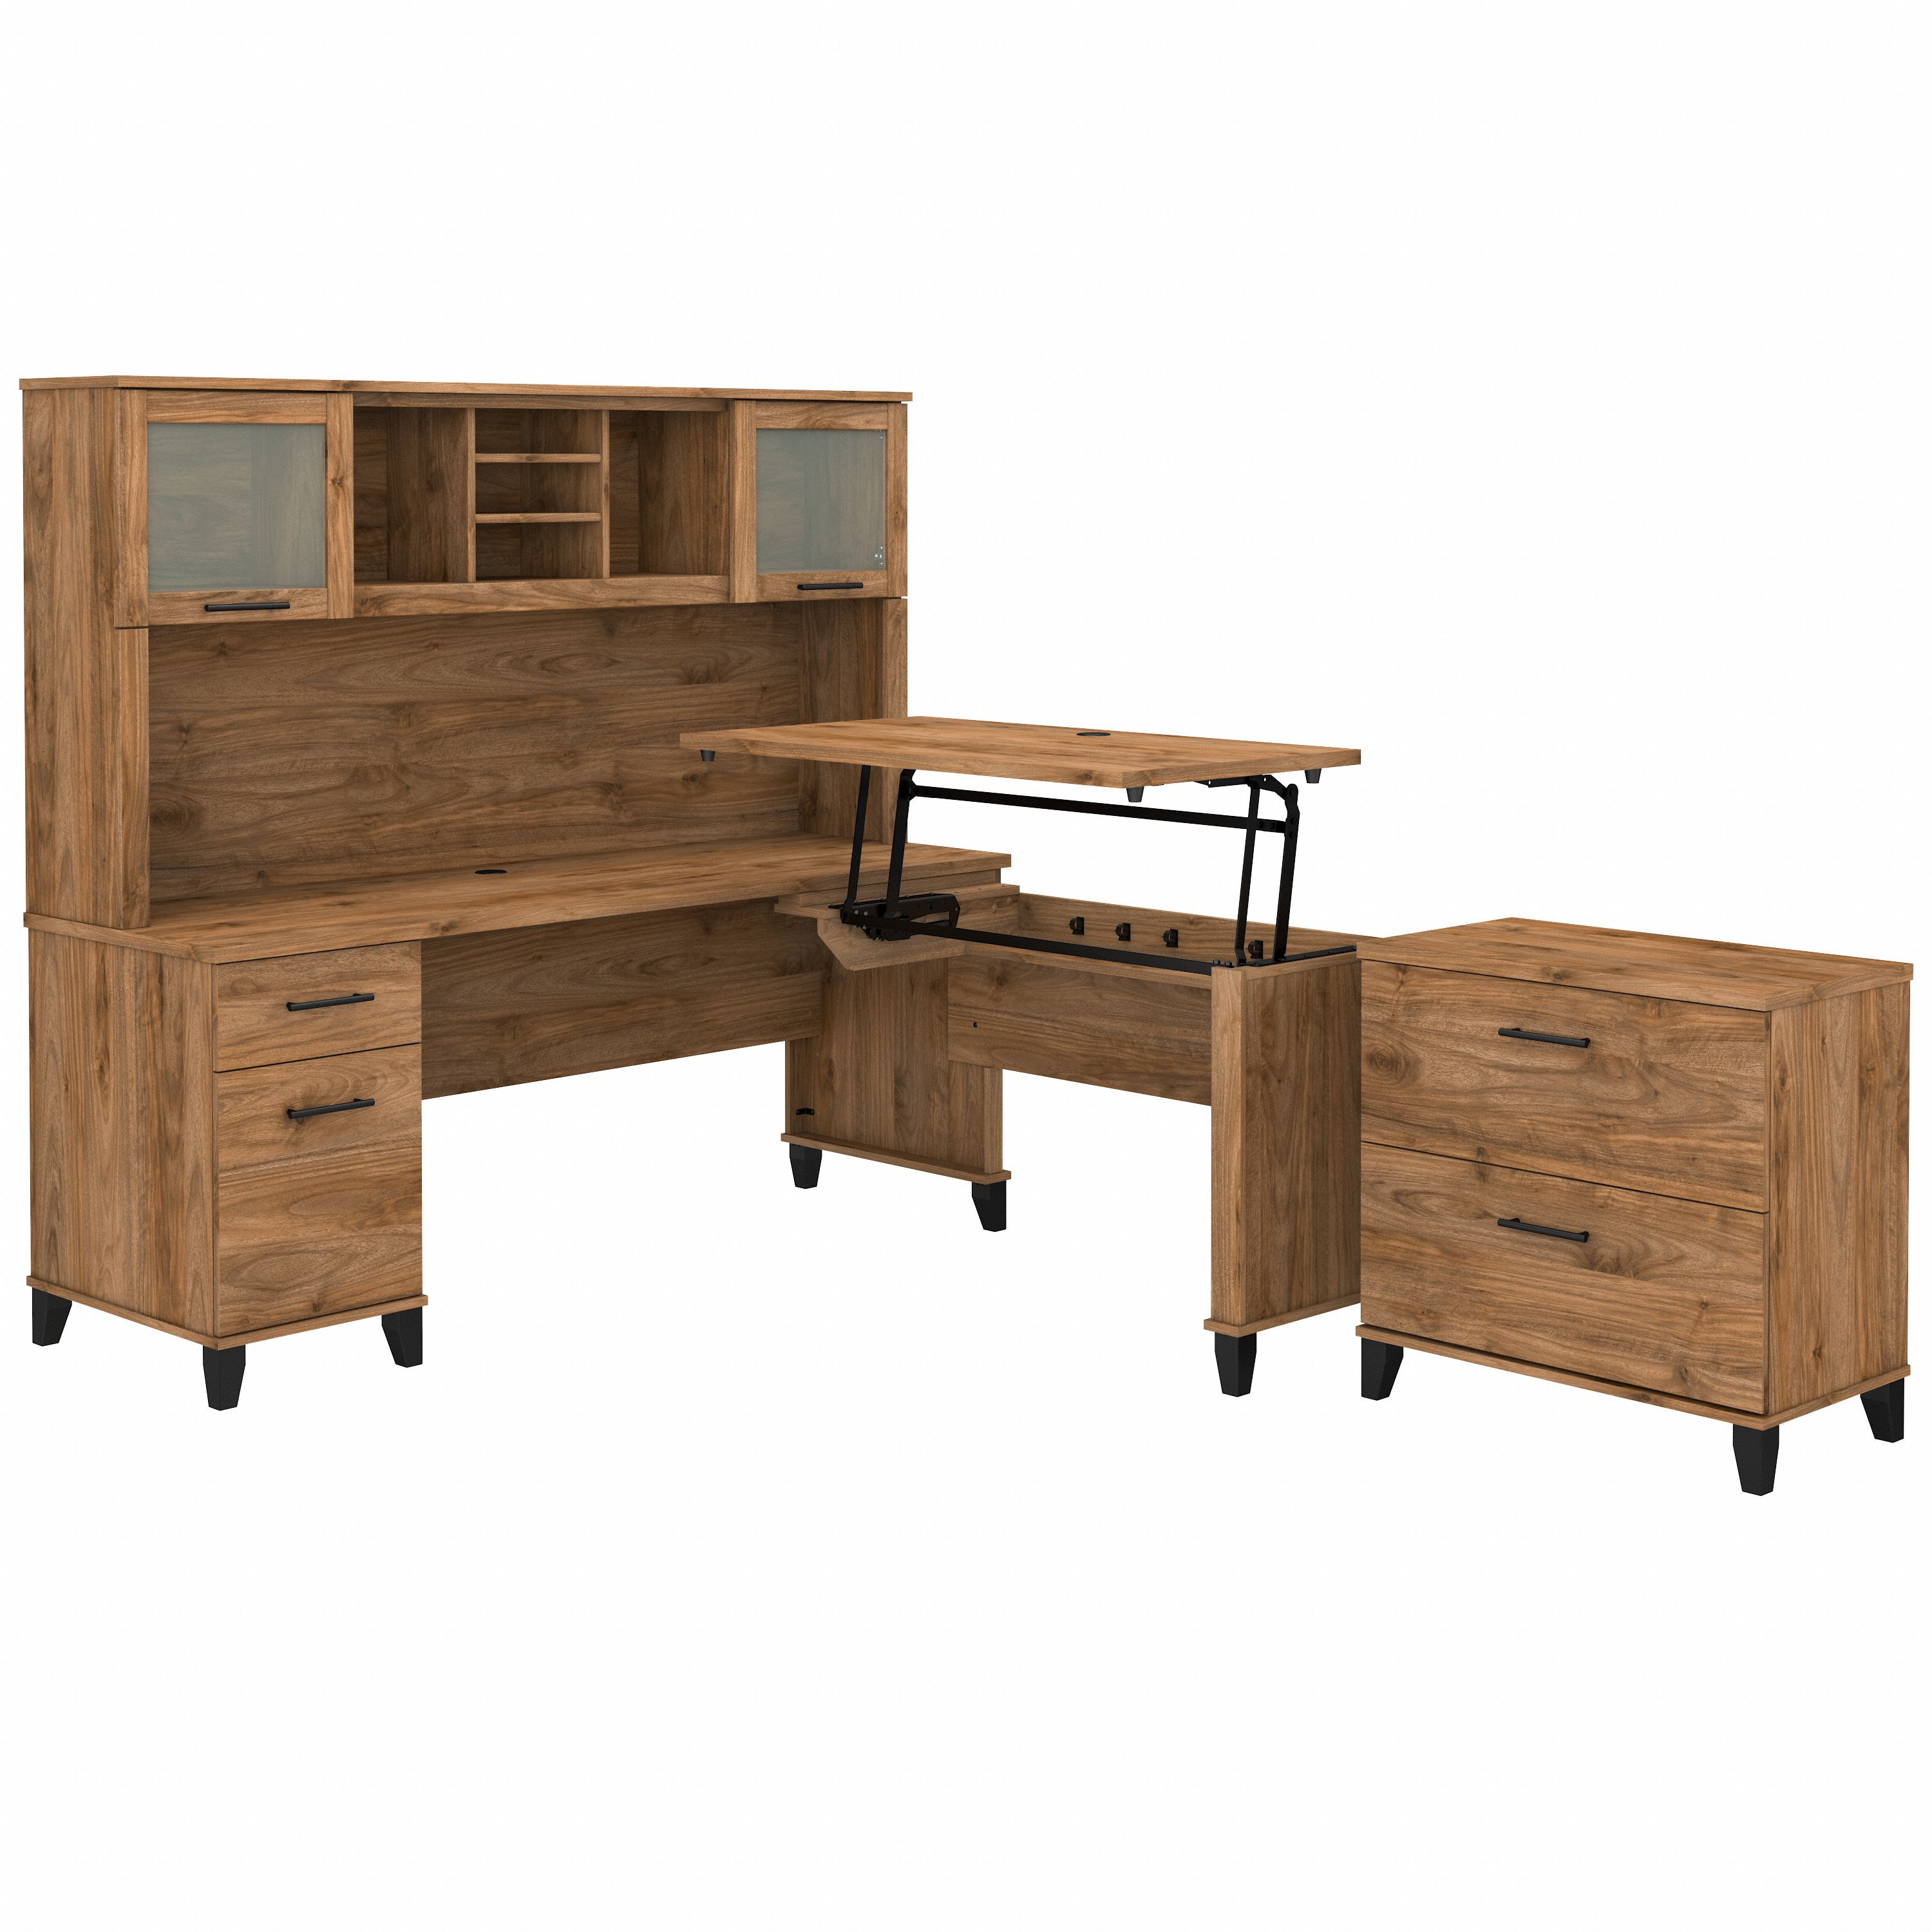 Shop Bush Furniture Somerset 72W 3 Position Sit to Stand L Shaped Desk with Hutch and File Cabinet 02 SET016FW #color_fresh walnut